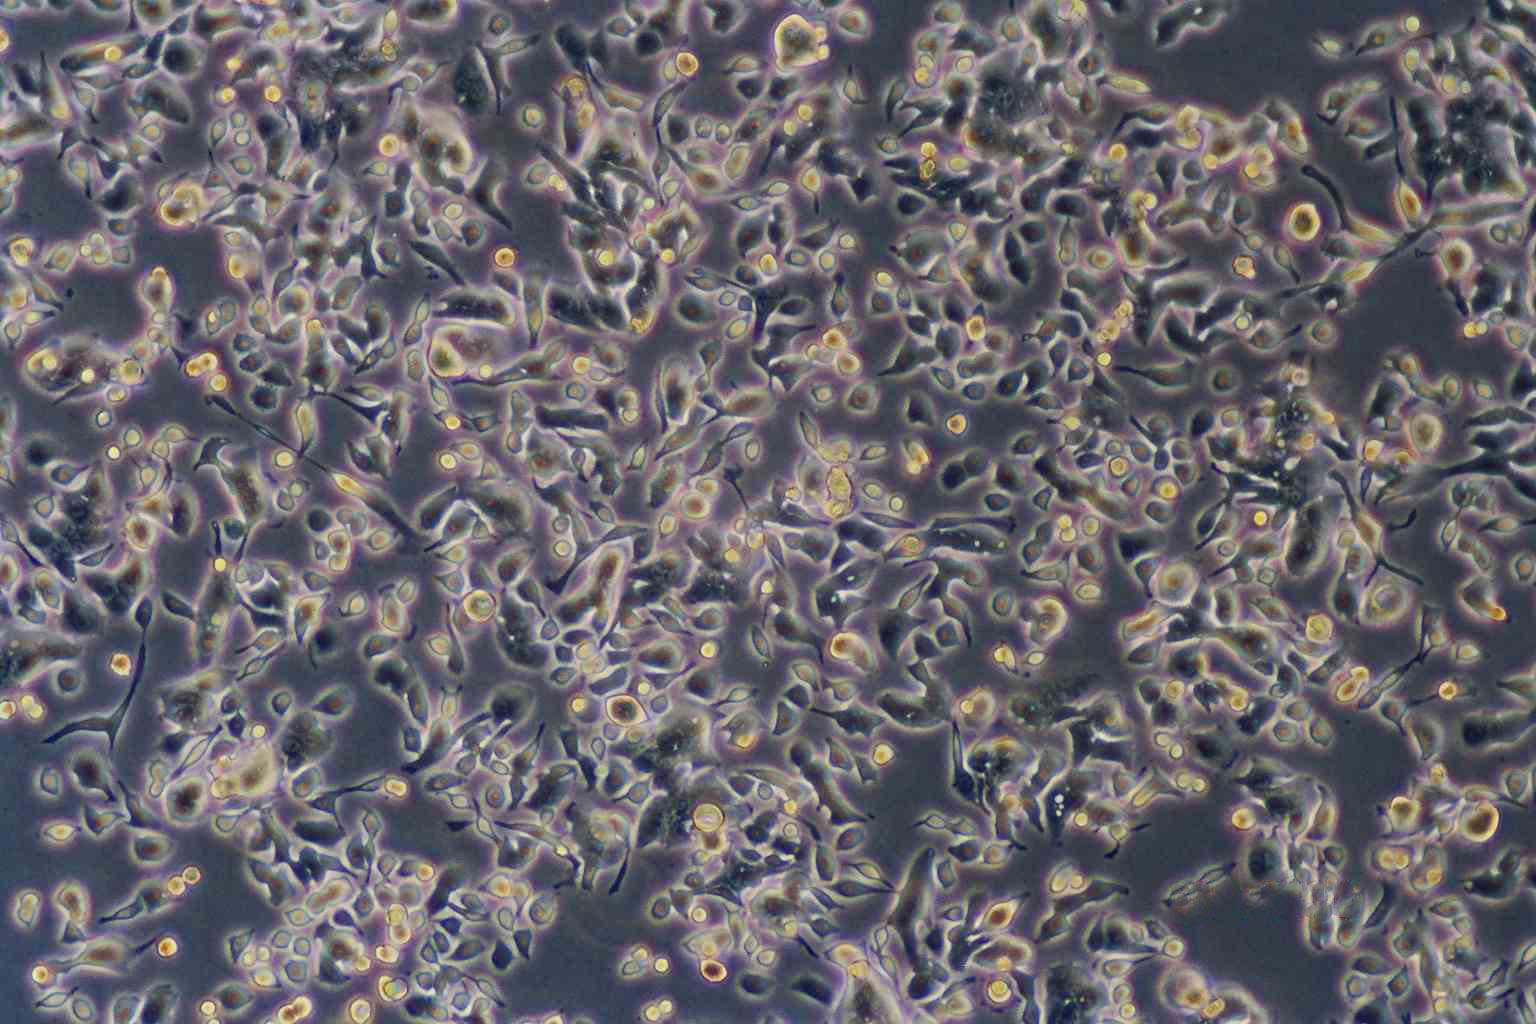 RBL-1 epithelioid cells大鼠嗜碱性粒细胞系,RBL-1 epithelioid cells